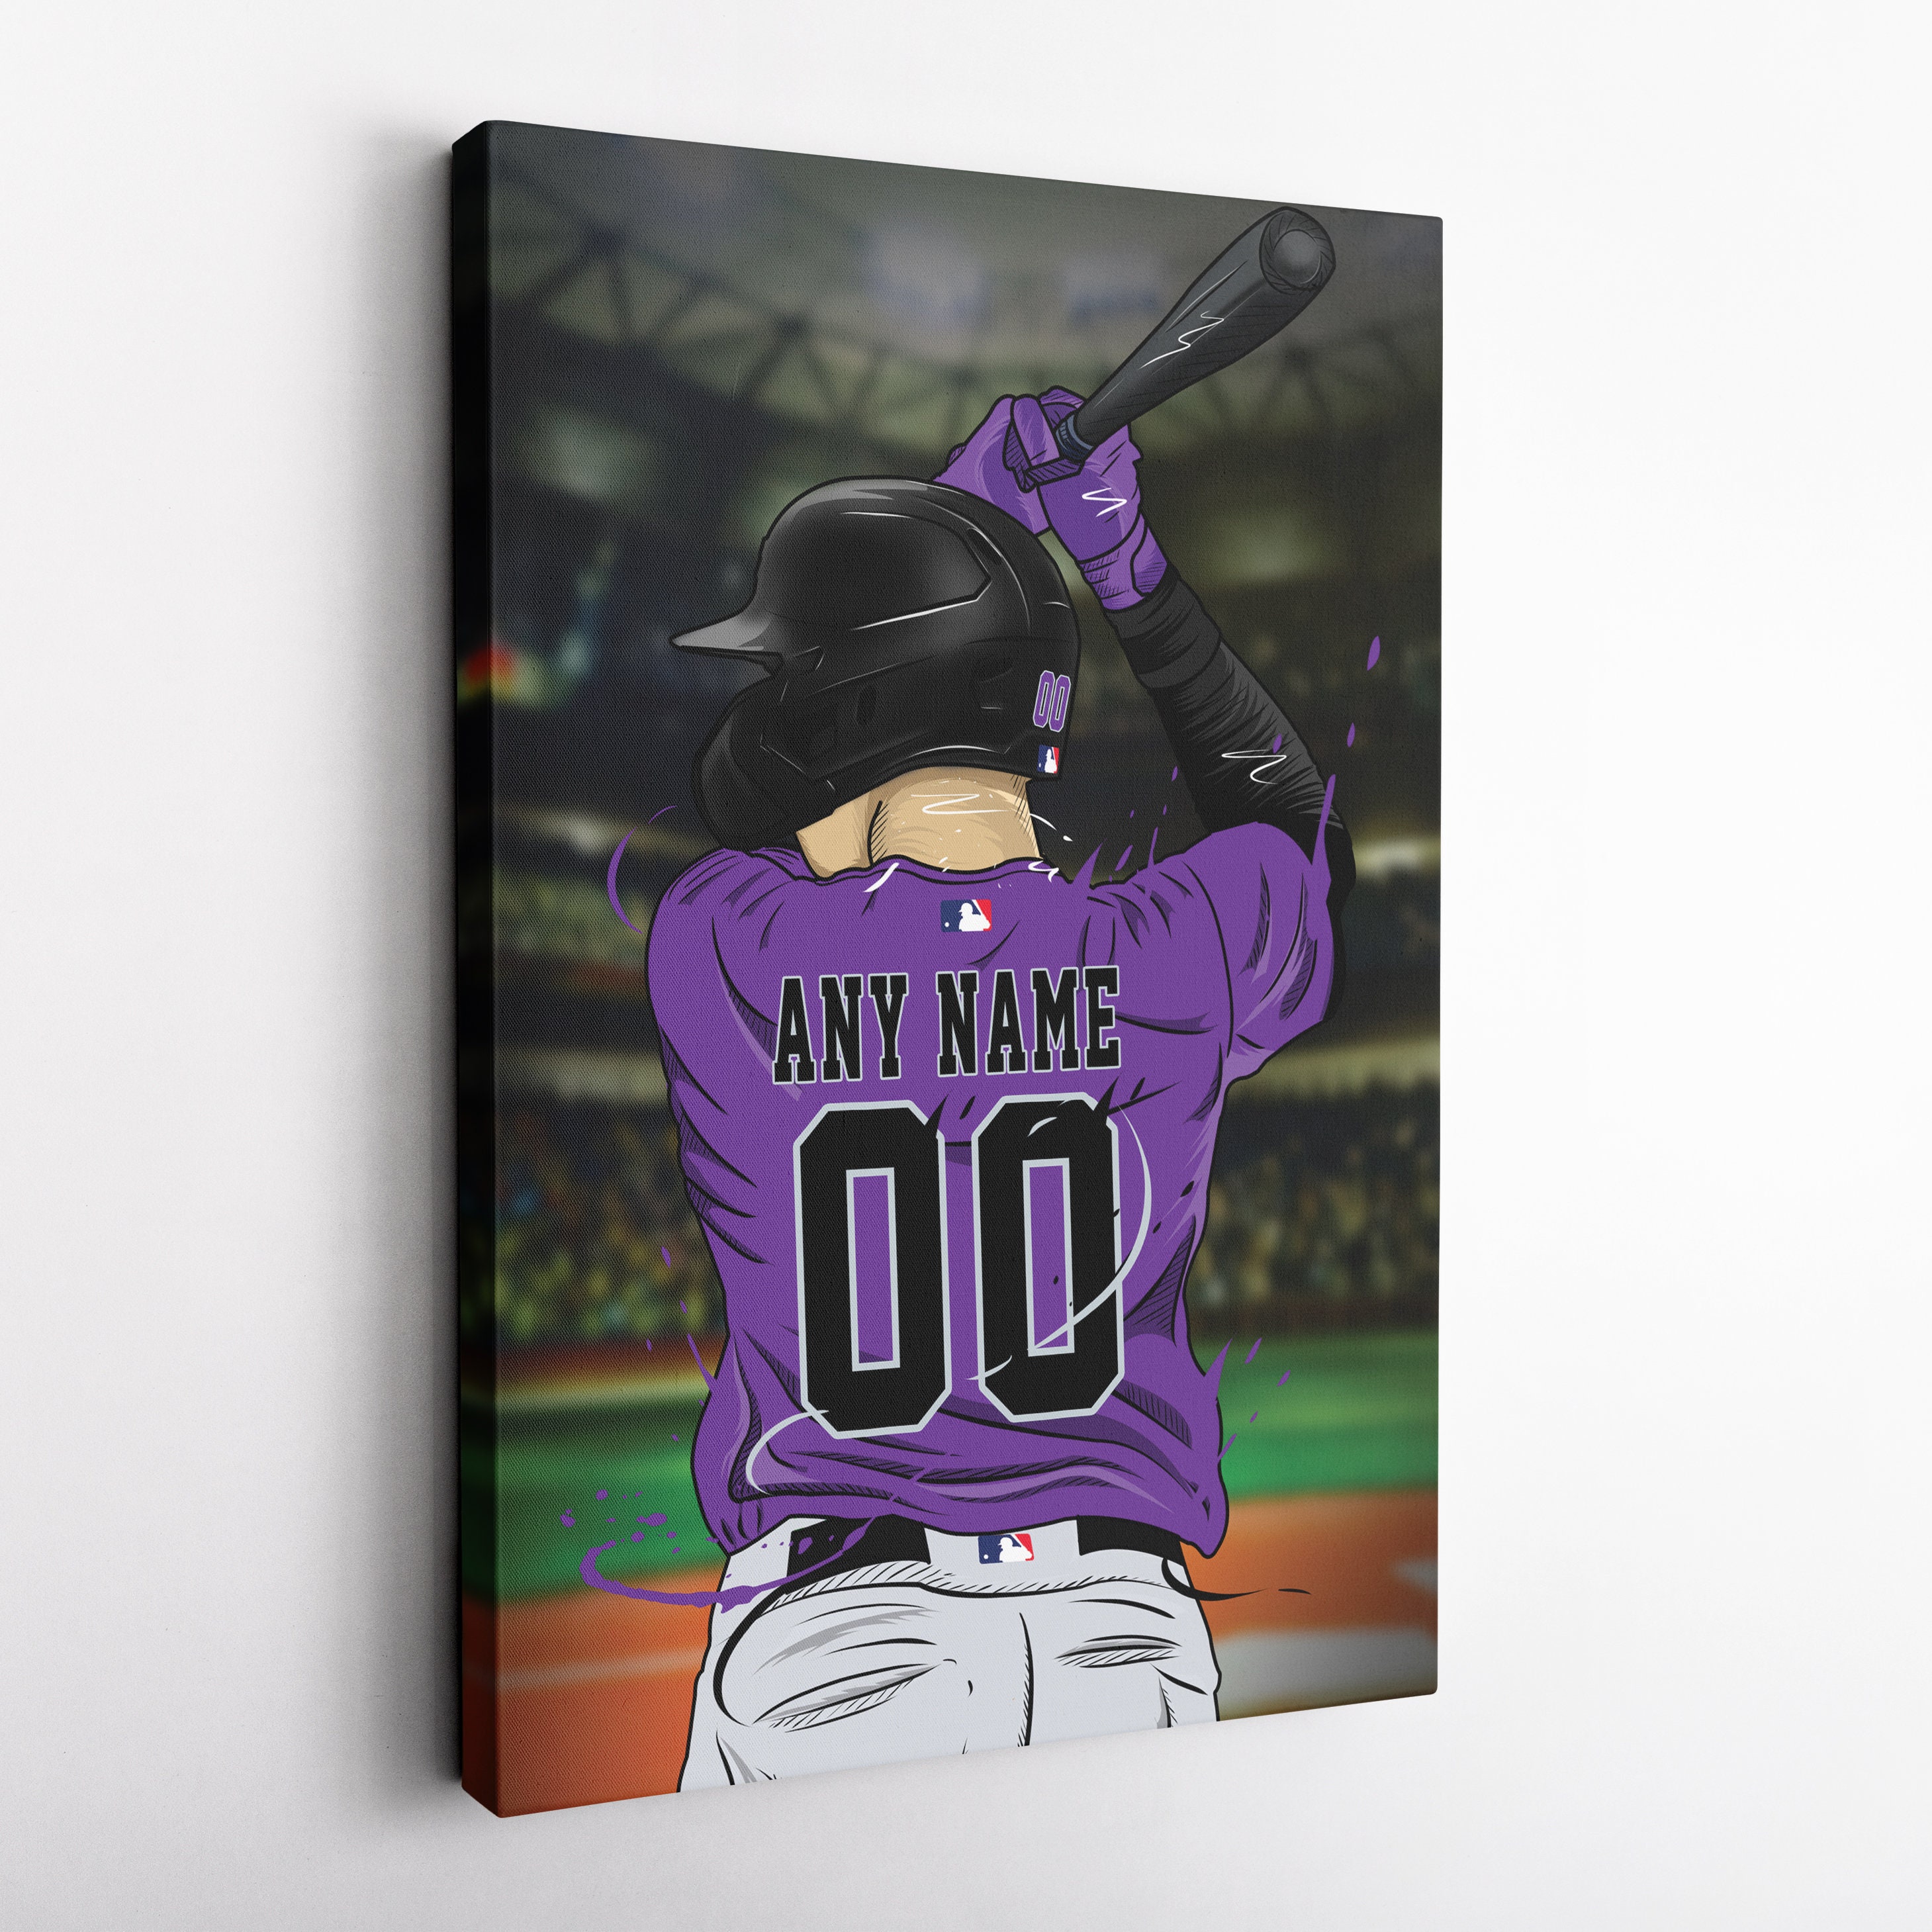 The best selling] Personalized Colorado Rockies Baseball All Over